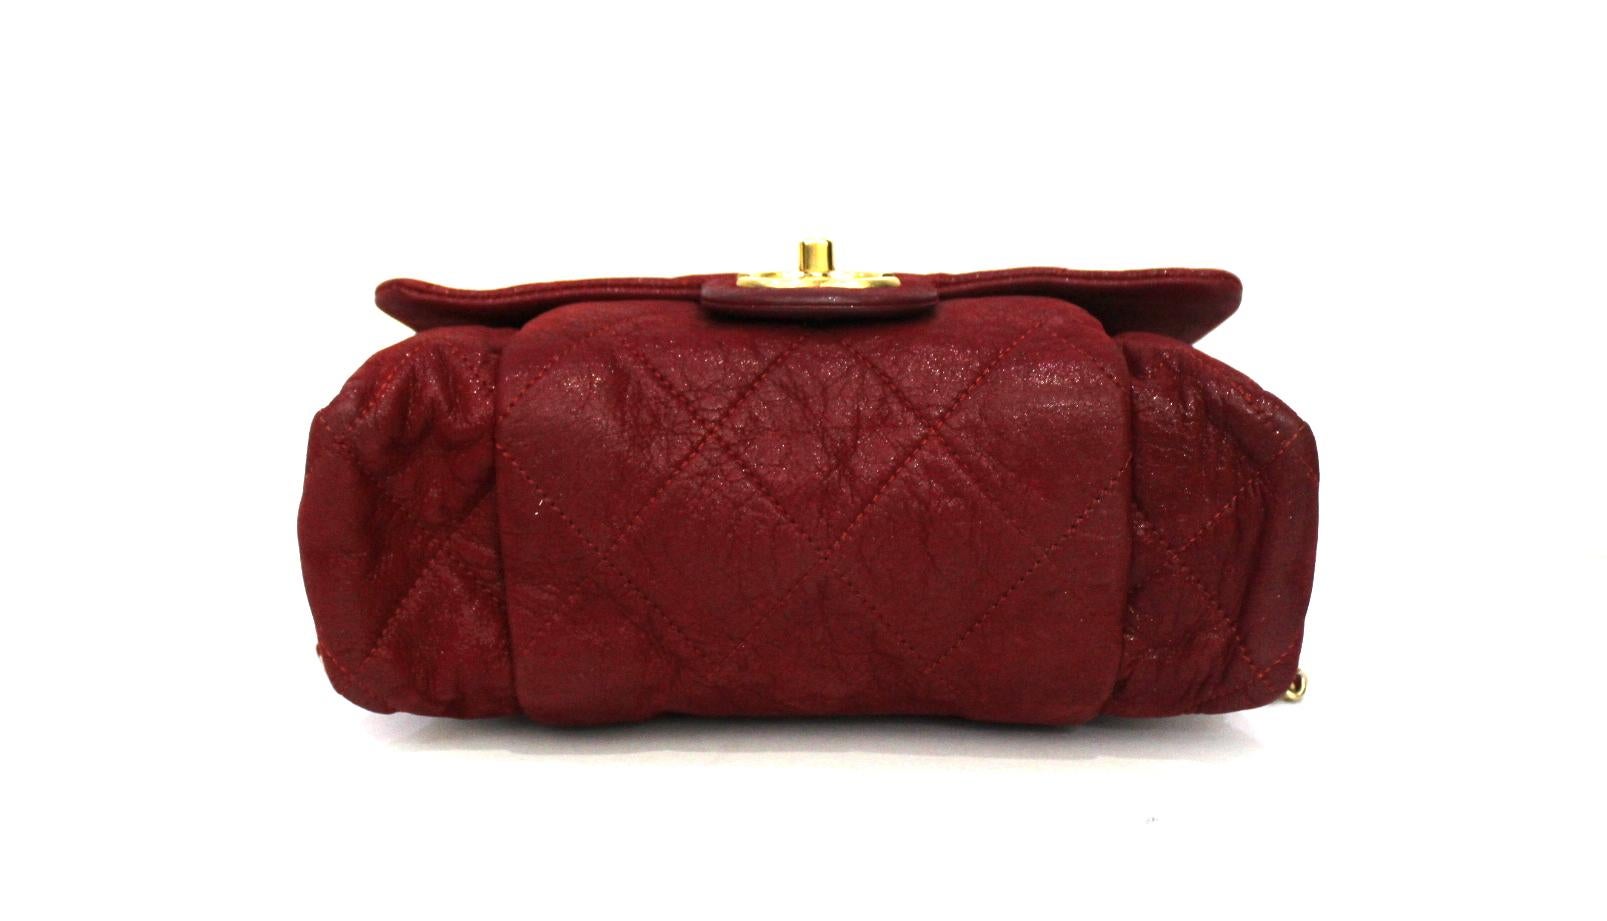 red patent leather purse